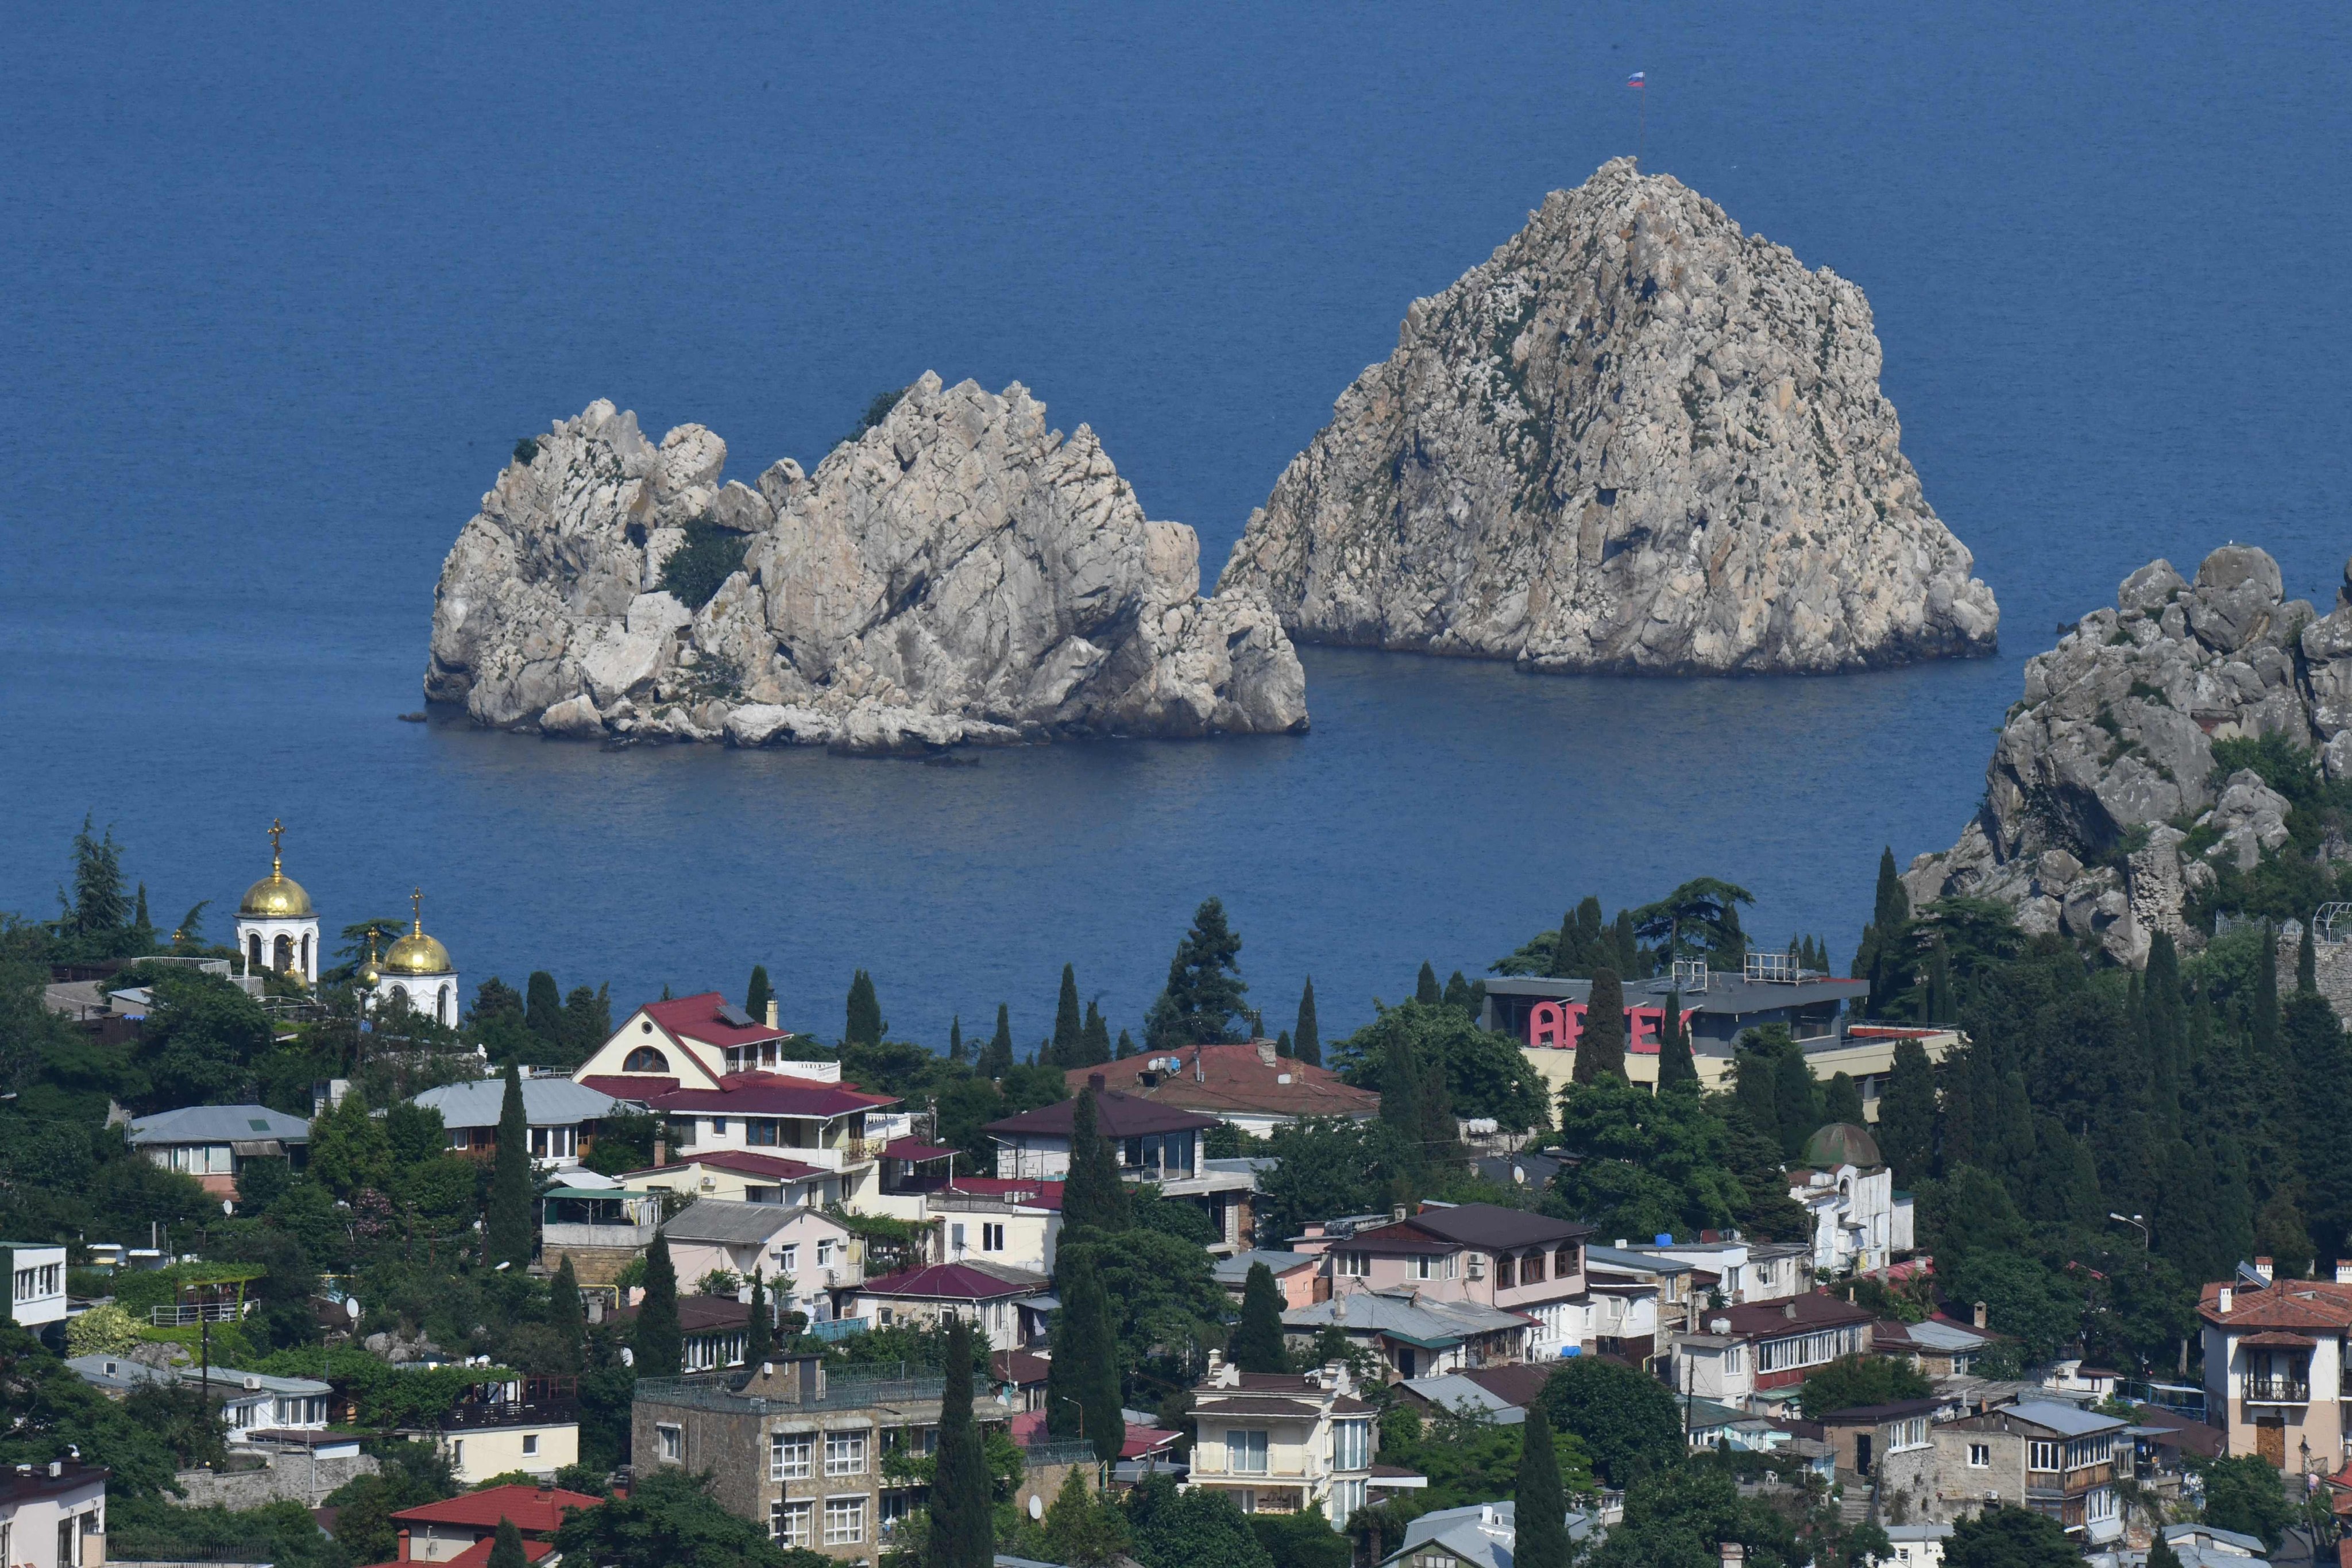 The resort city of Yalta in Crimea, which is regularly hit by drones and explosions. Photo: AFP